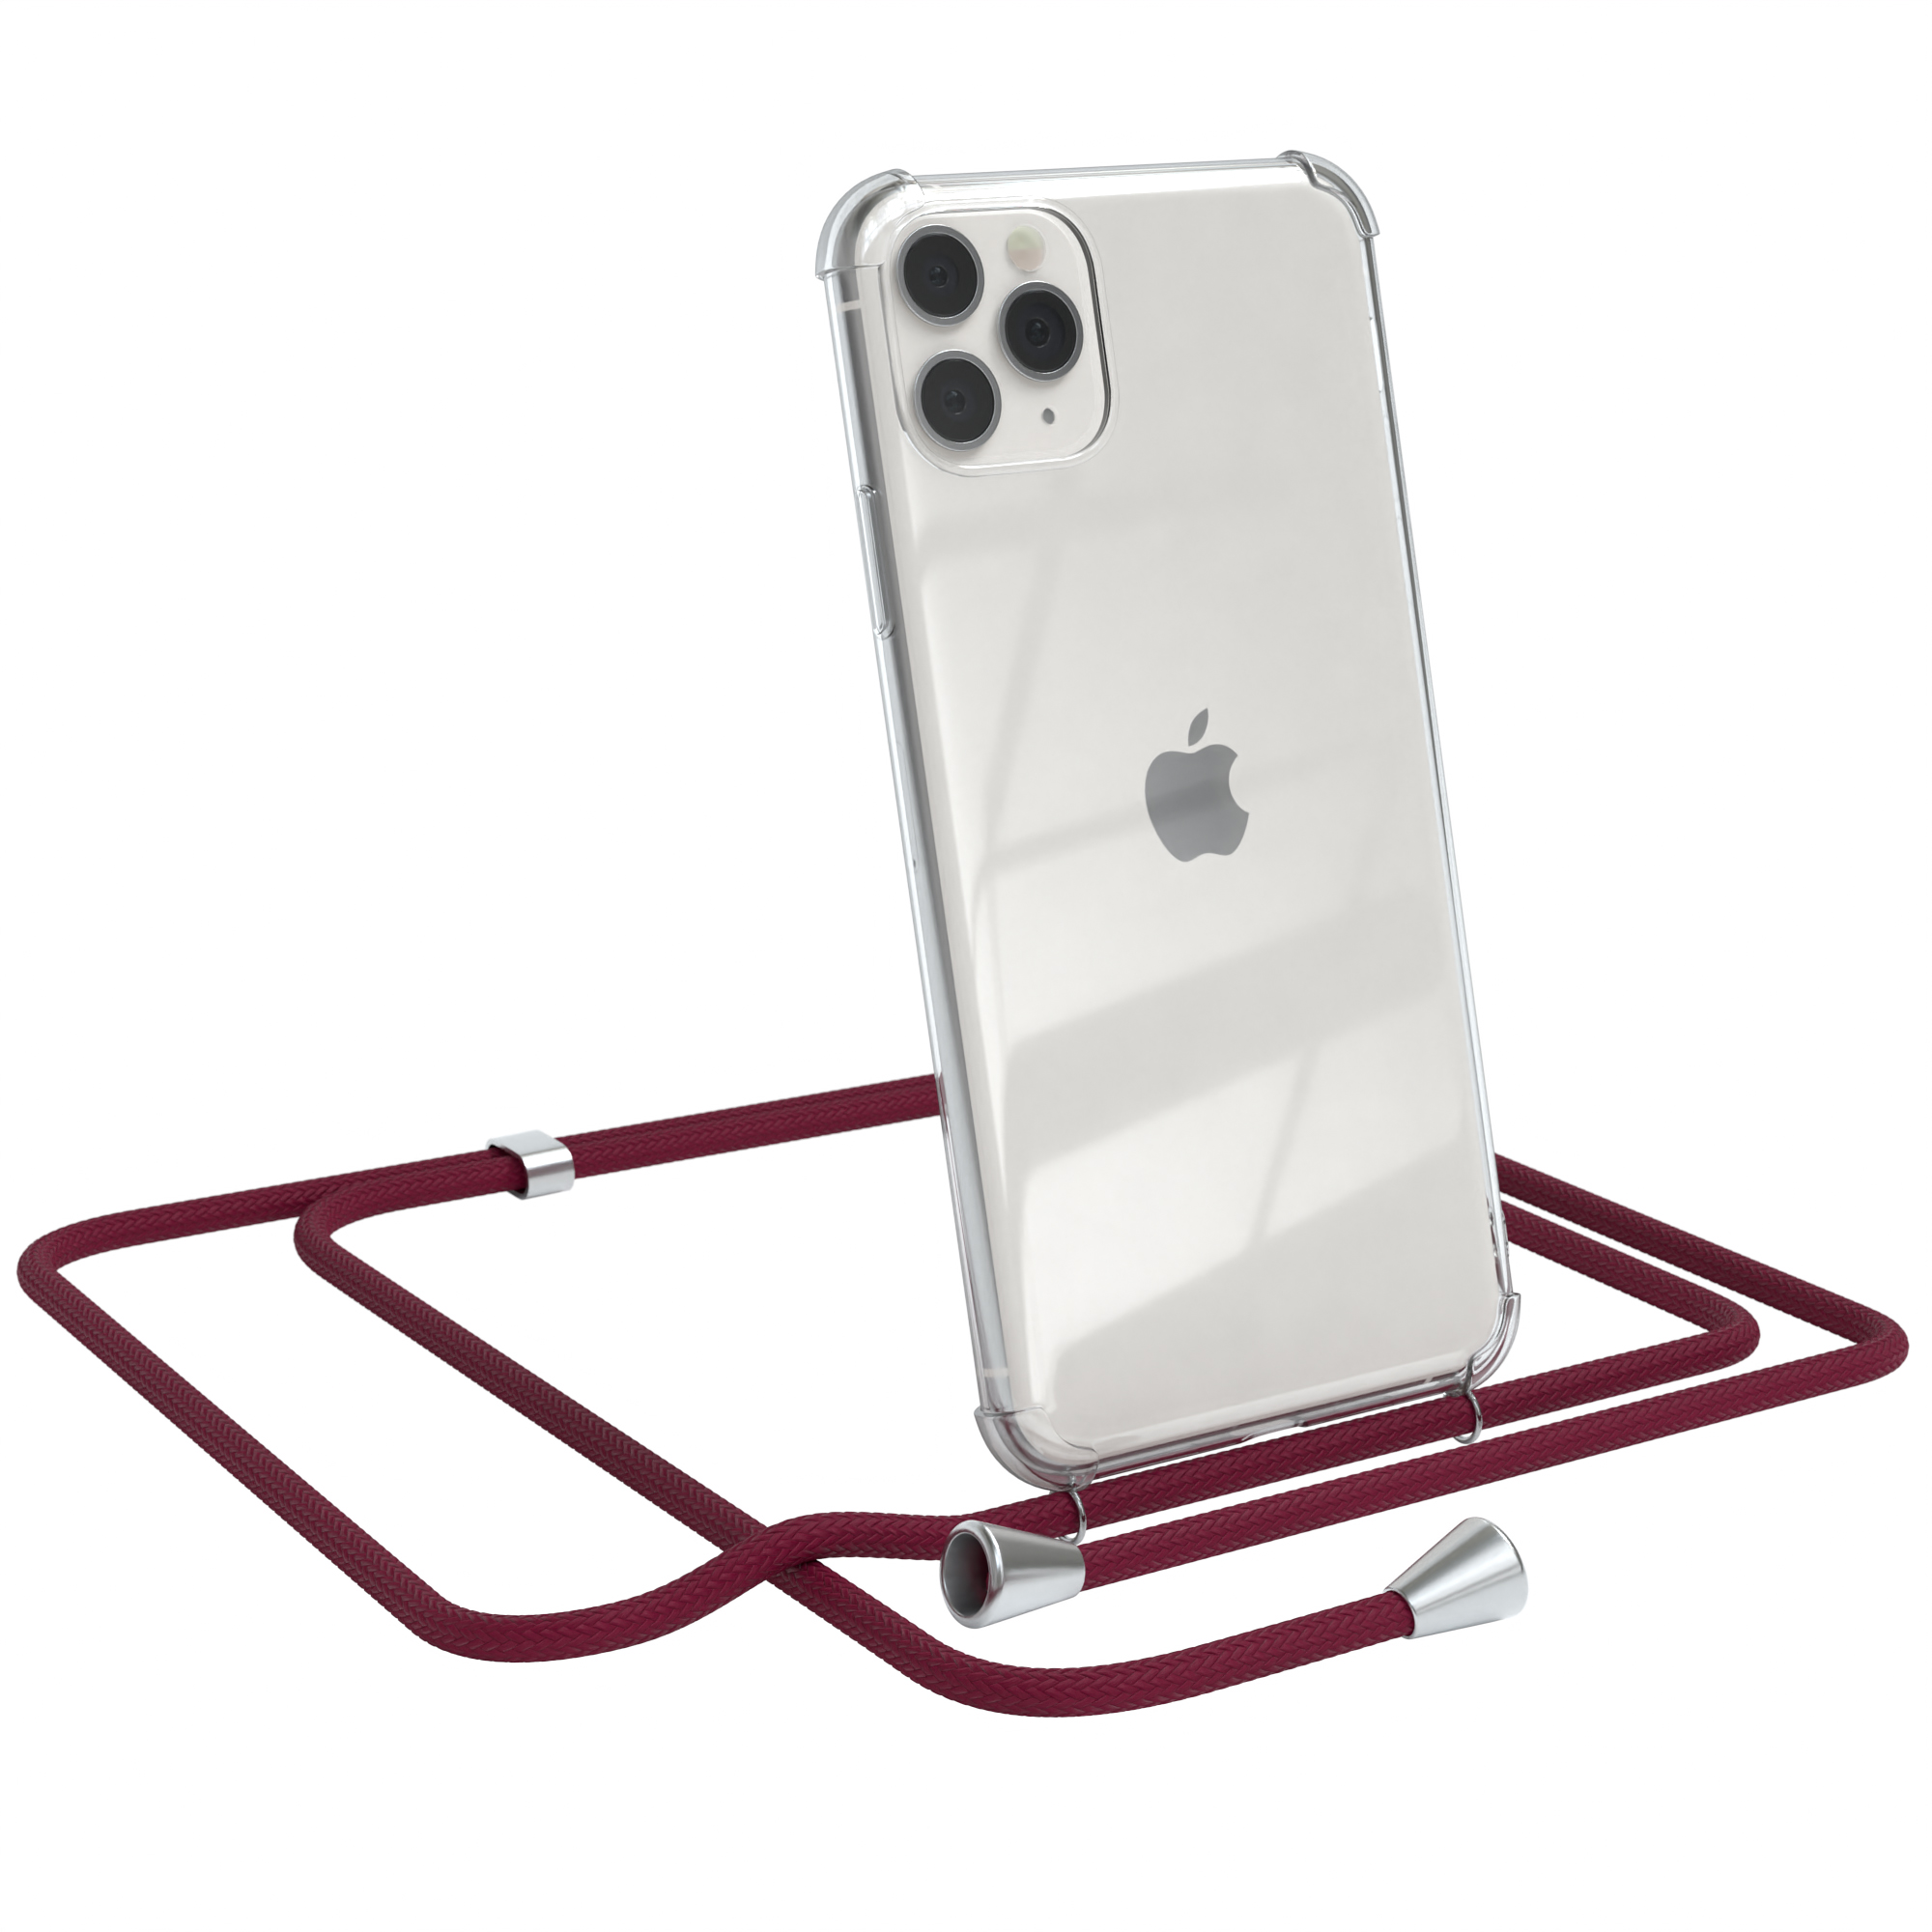 EAZY CASE Clear Silber Apple, iPhone 11 Clips Max, Bordeaux Umhängeband, Umhängetasche, / Cover Rot mit Pro